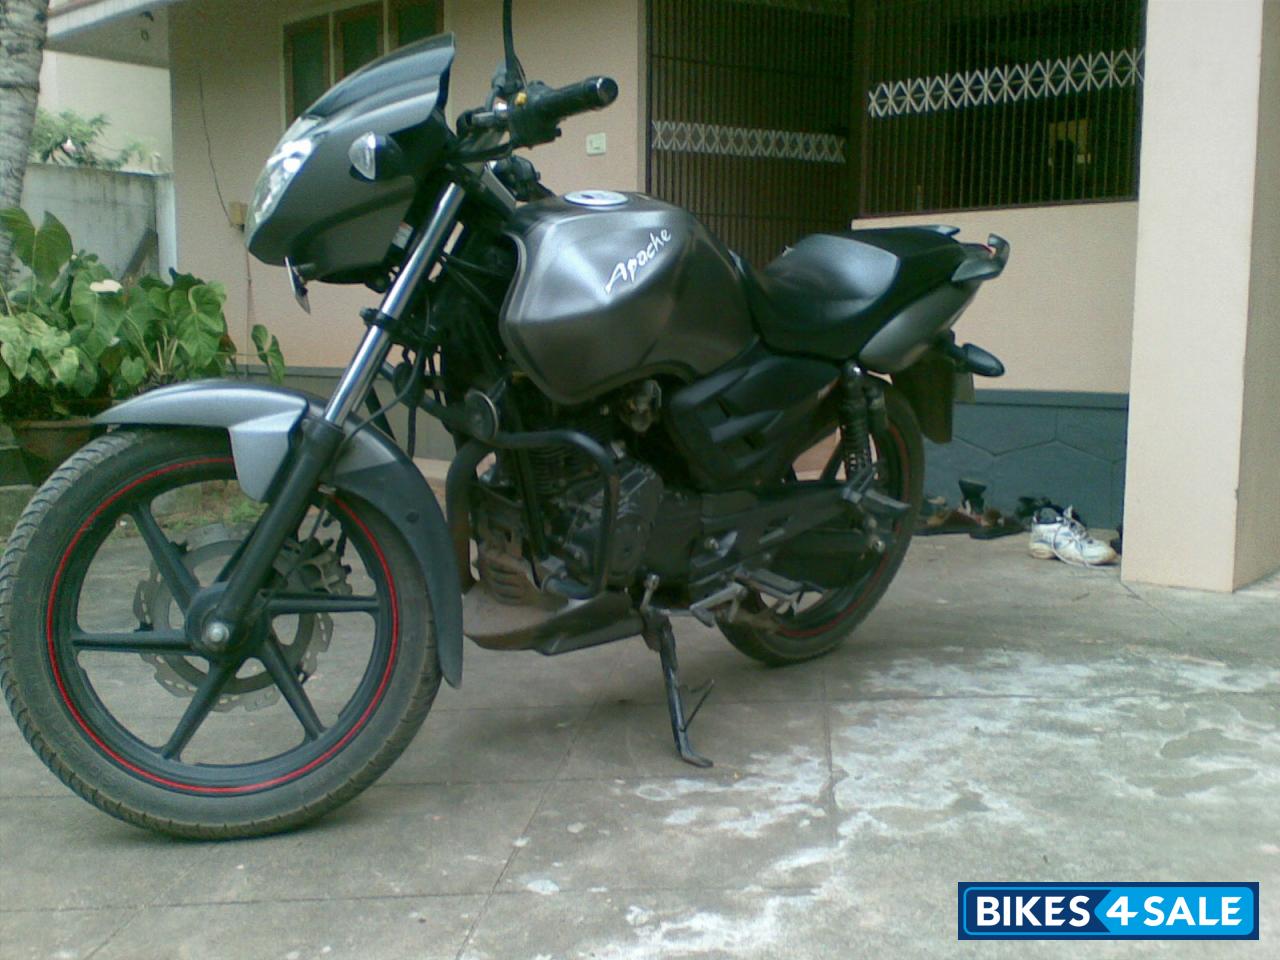 Used 07 Model Tvs Apache Rtr 160 For Sale In Chennai Id 167 Grey Colour Bikes4sale